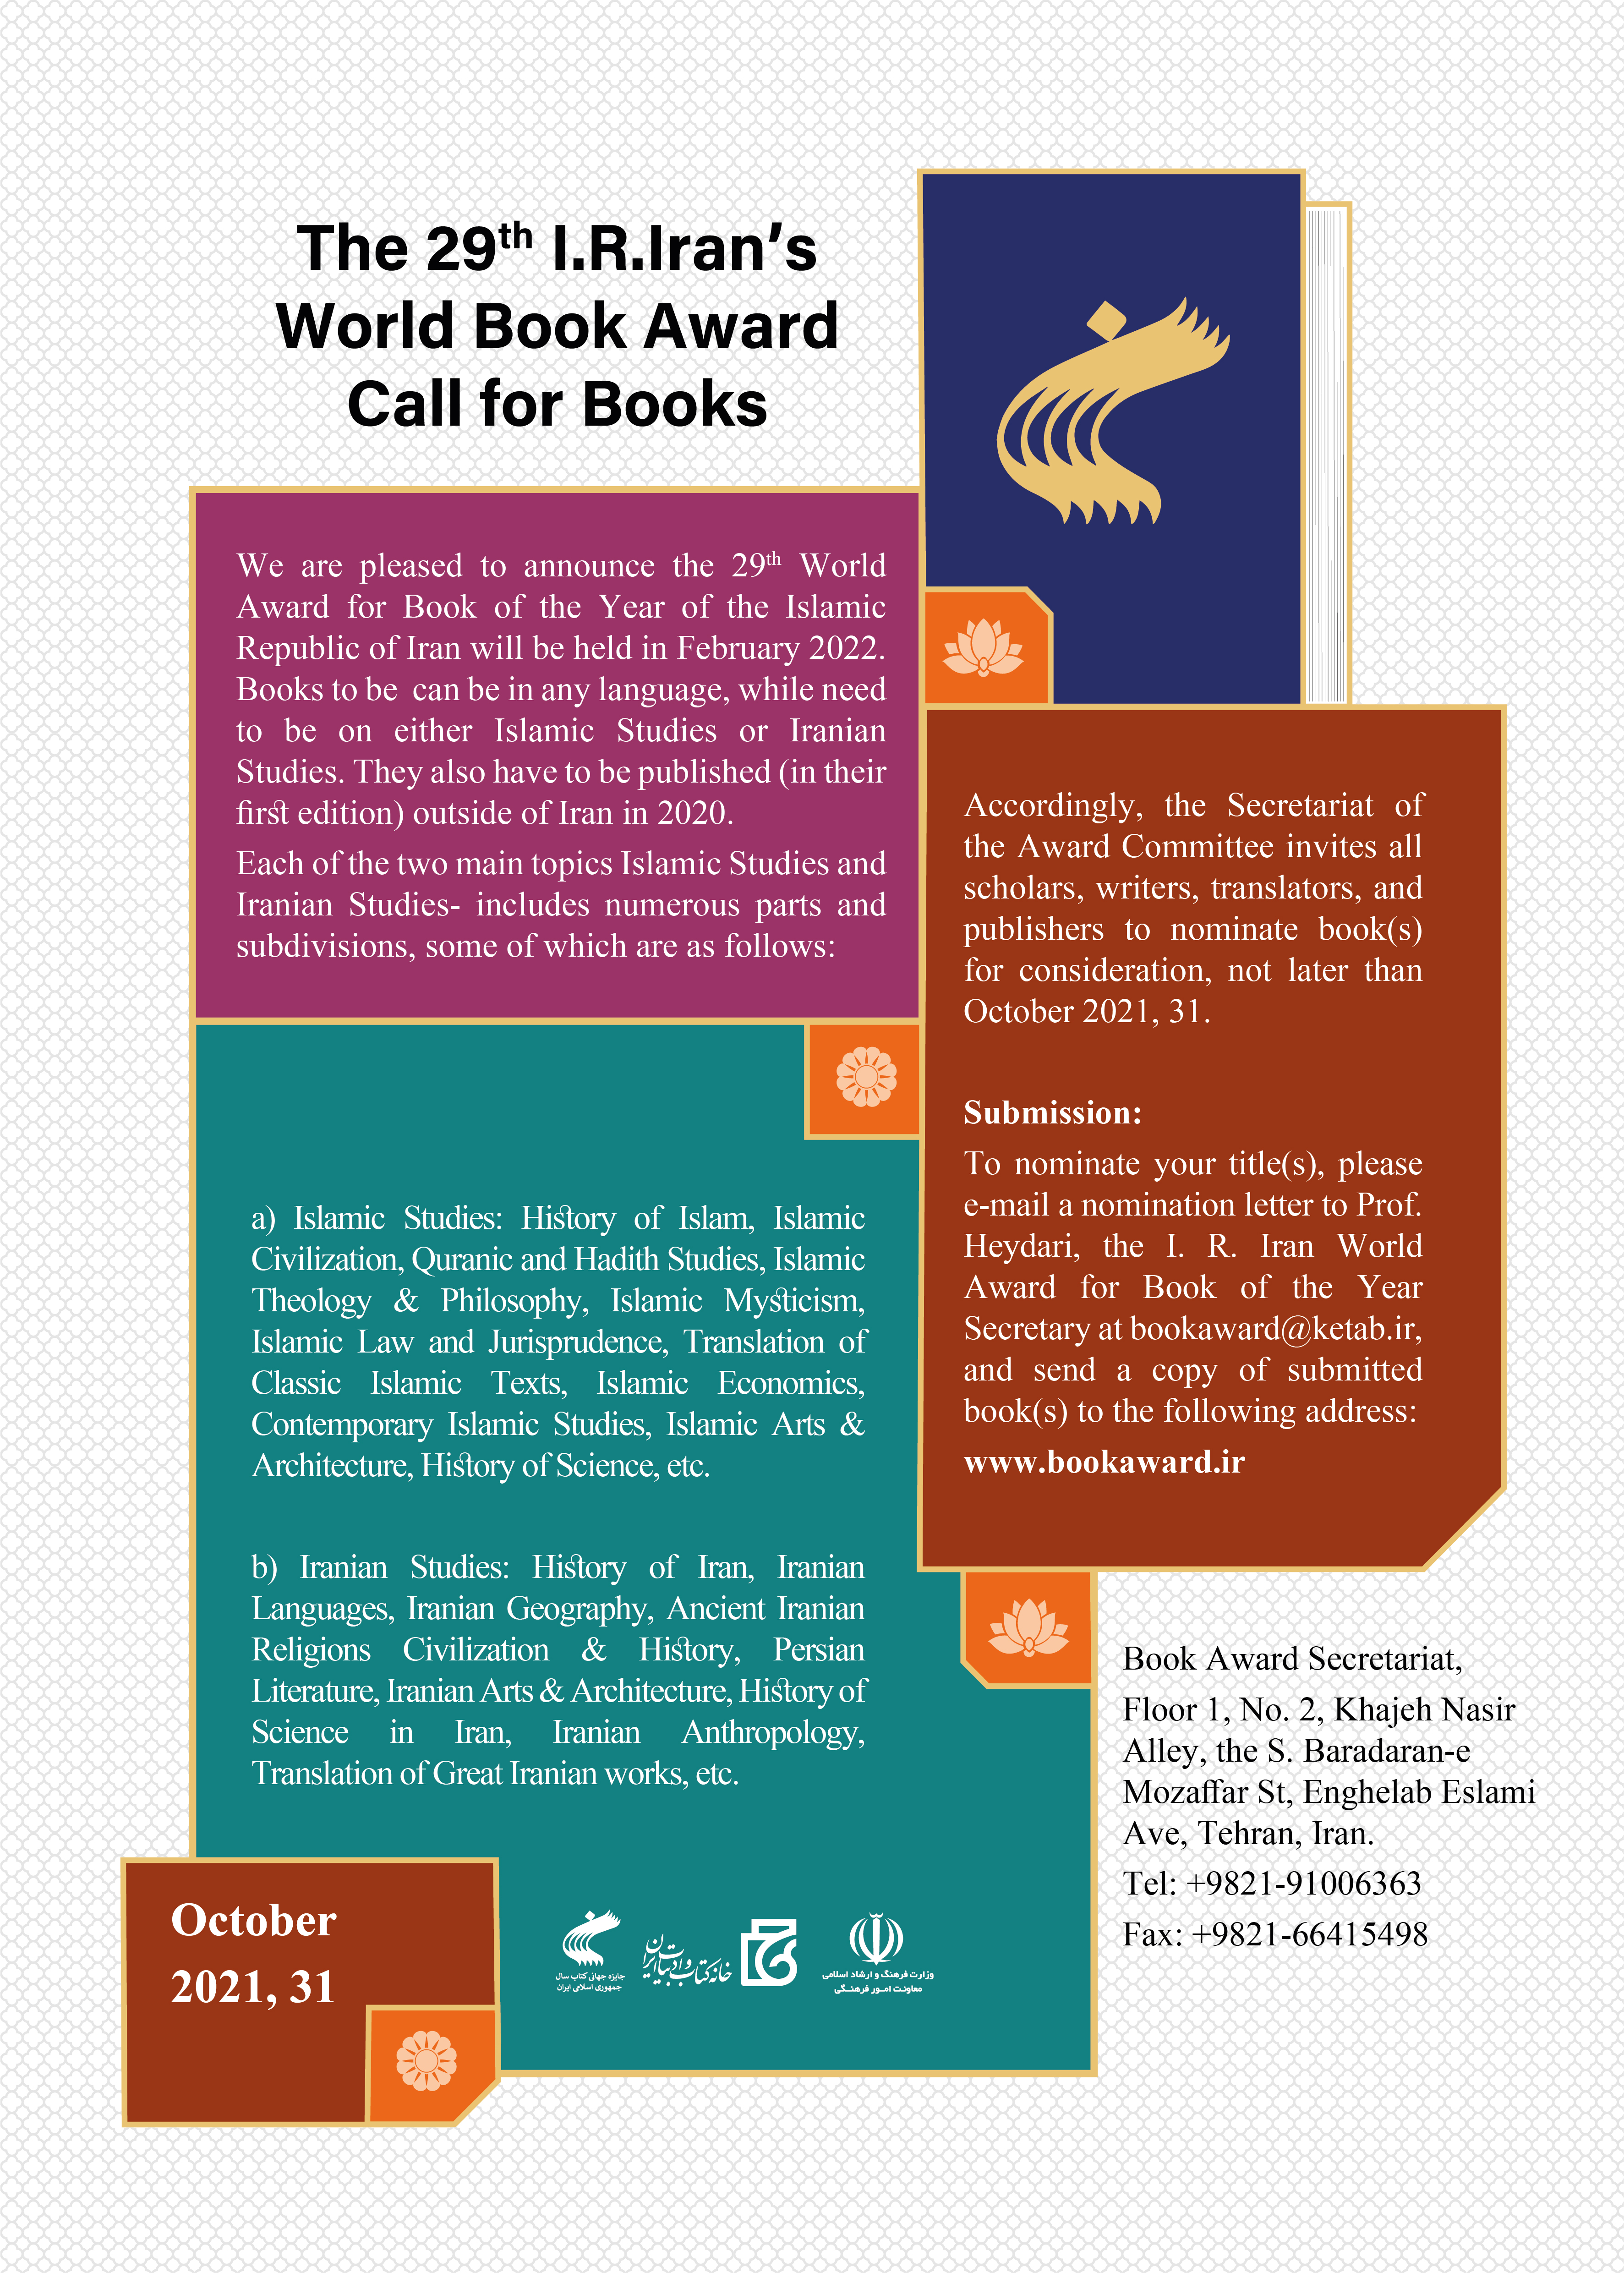 Call for The 29th I.R. Iran`s World Book Award issued